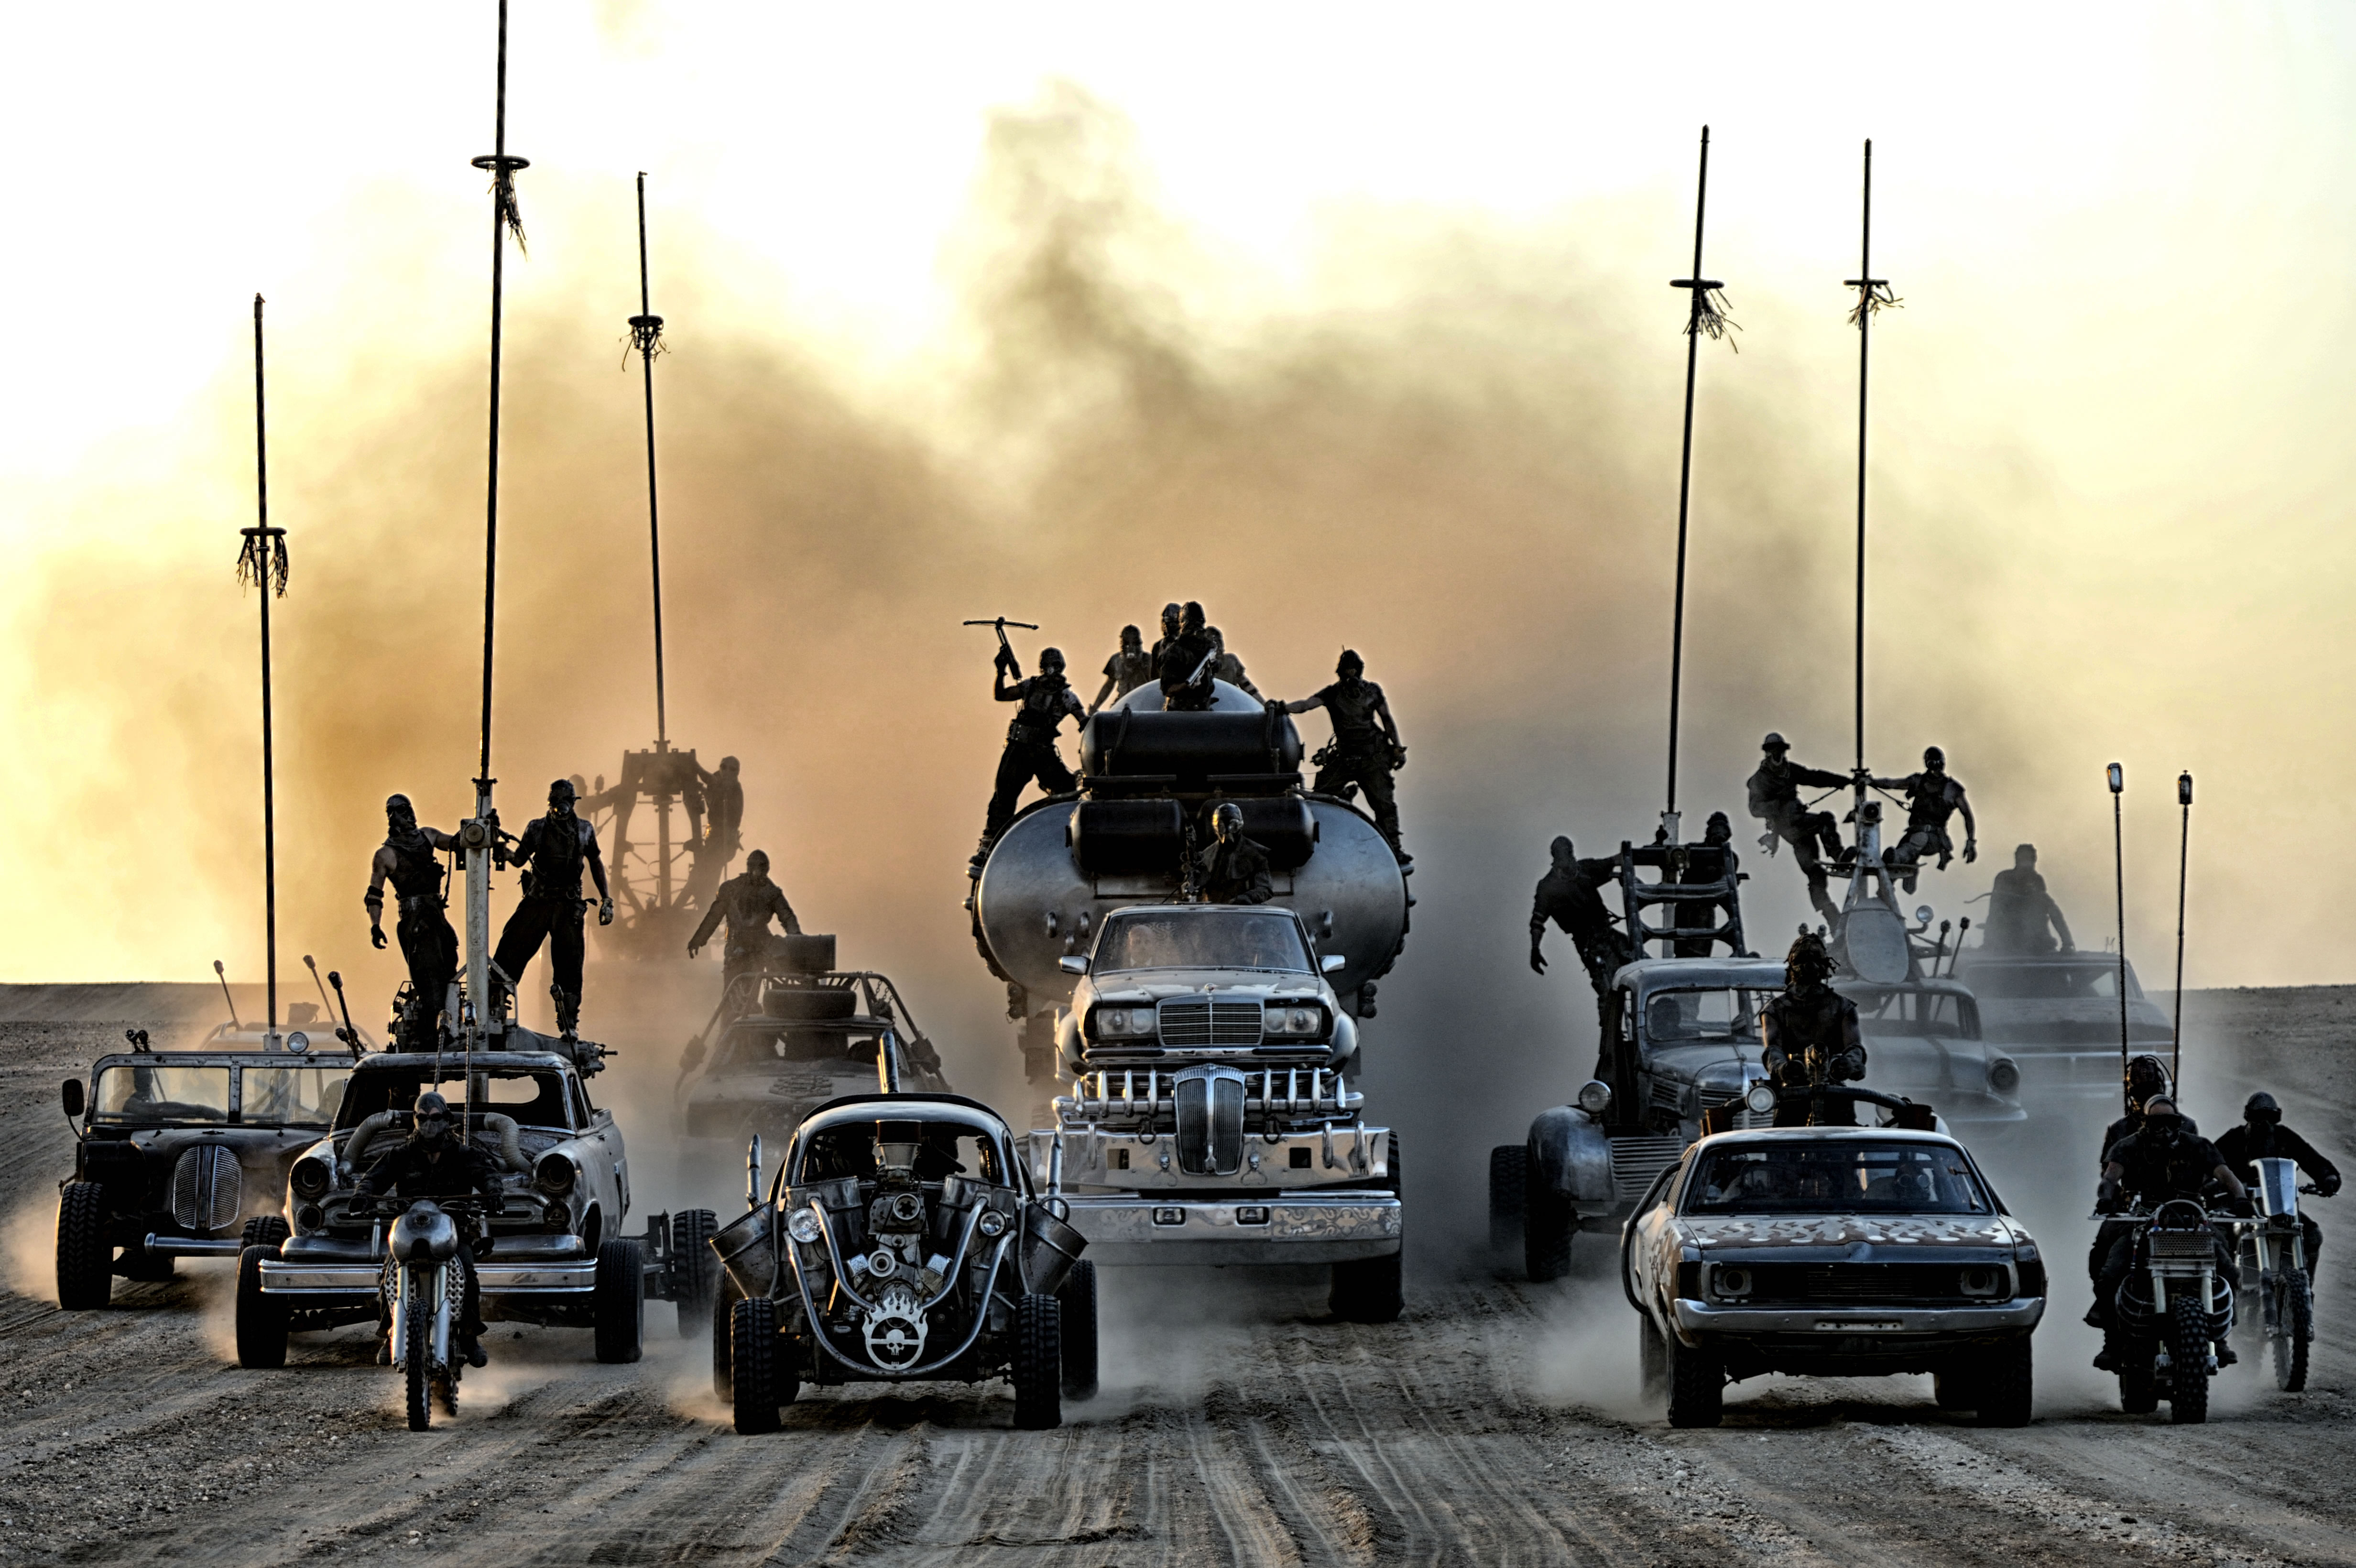 7680x832 Resolution Mad Max Fury Road Vehicles Wallpapers 7680x832 ...